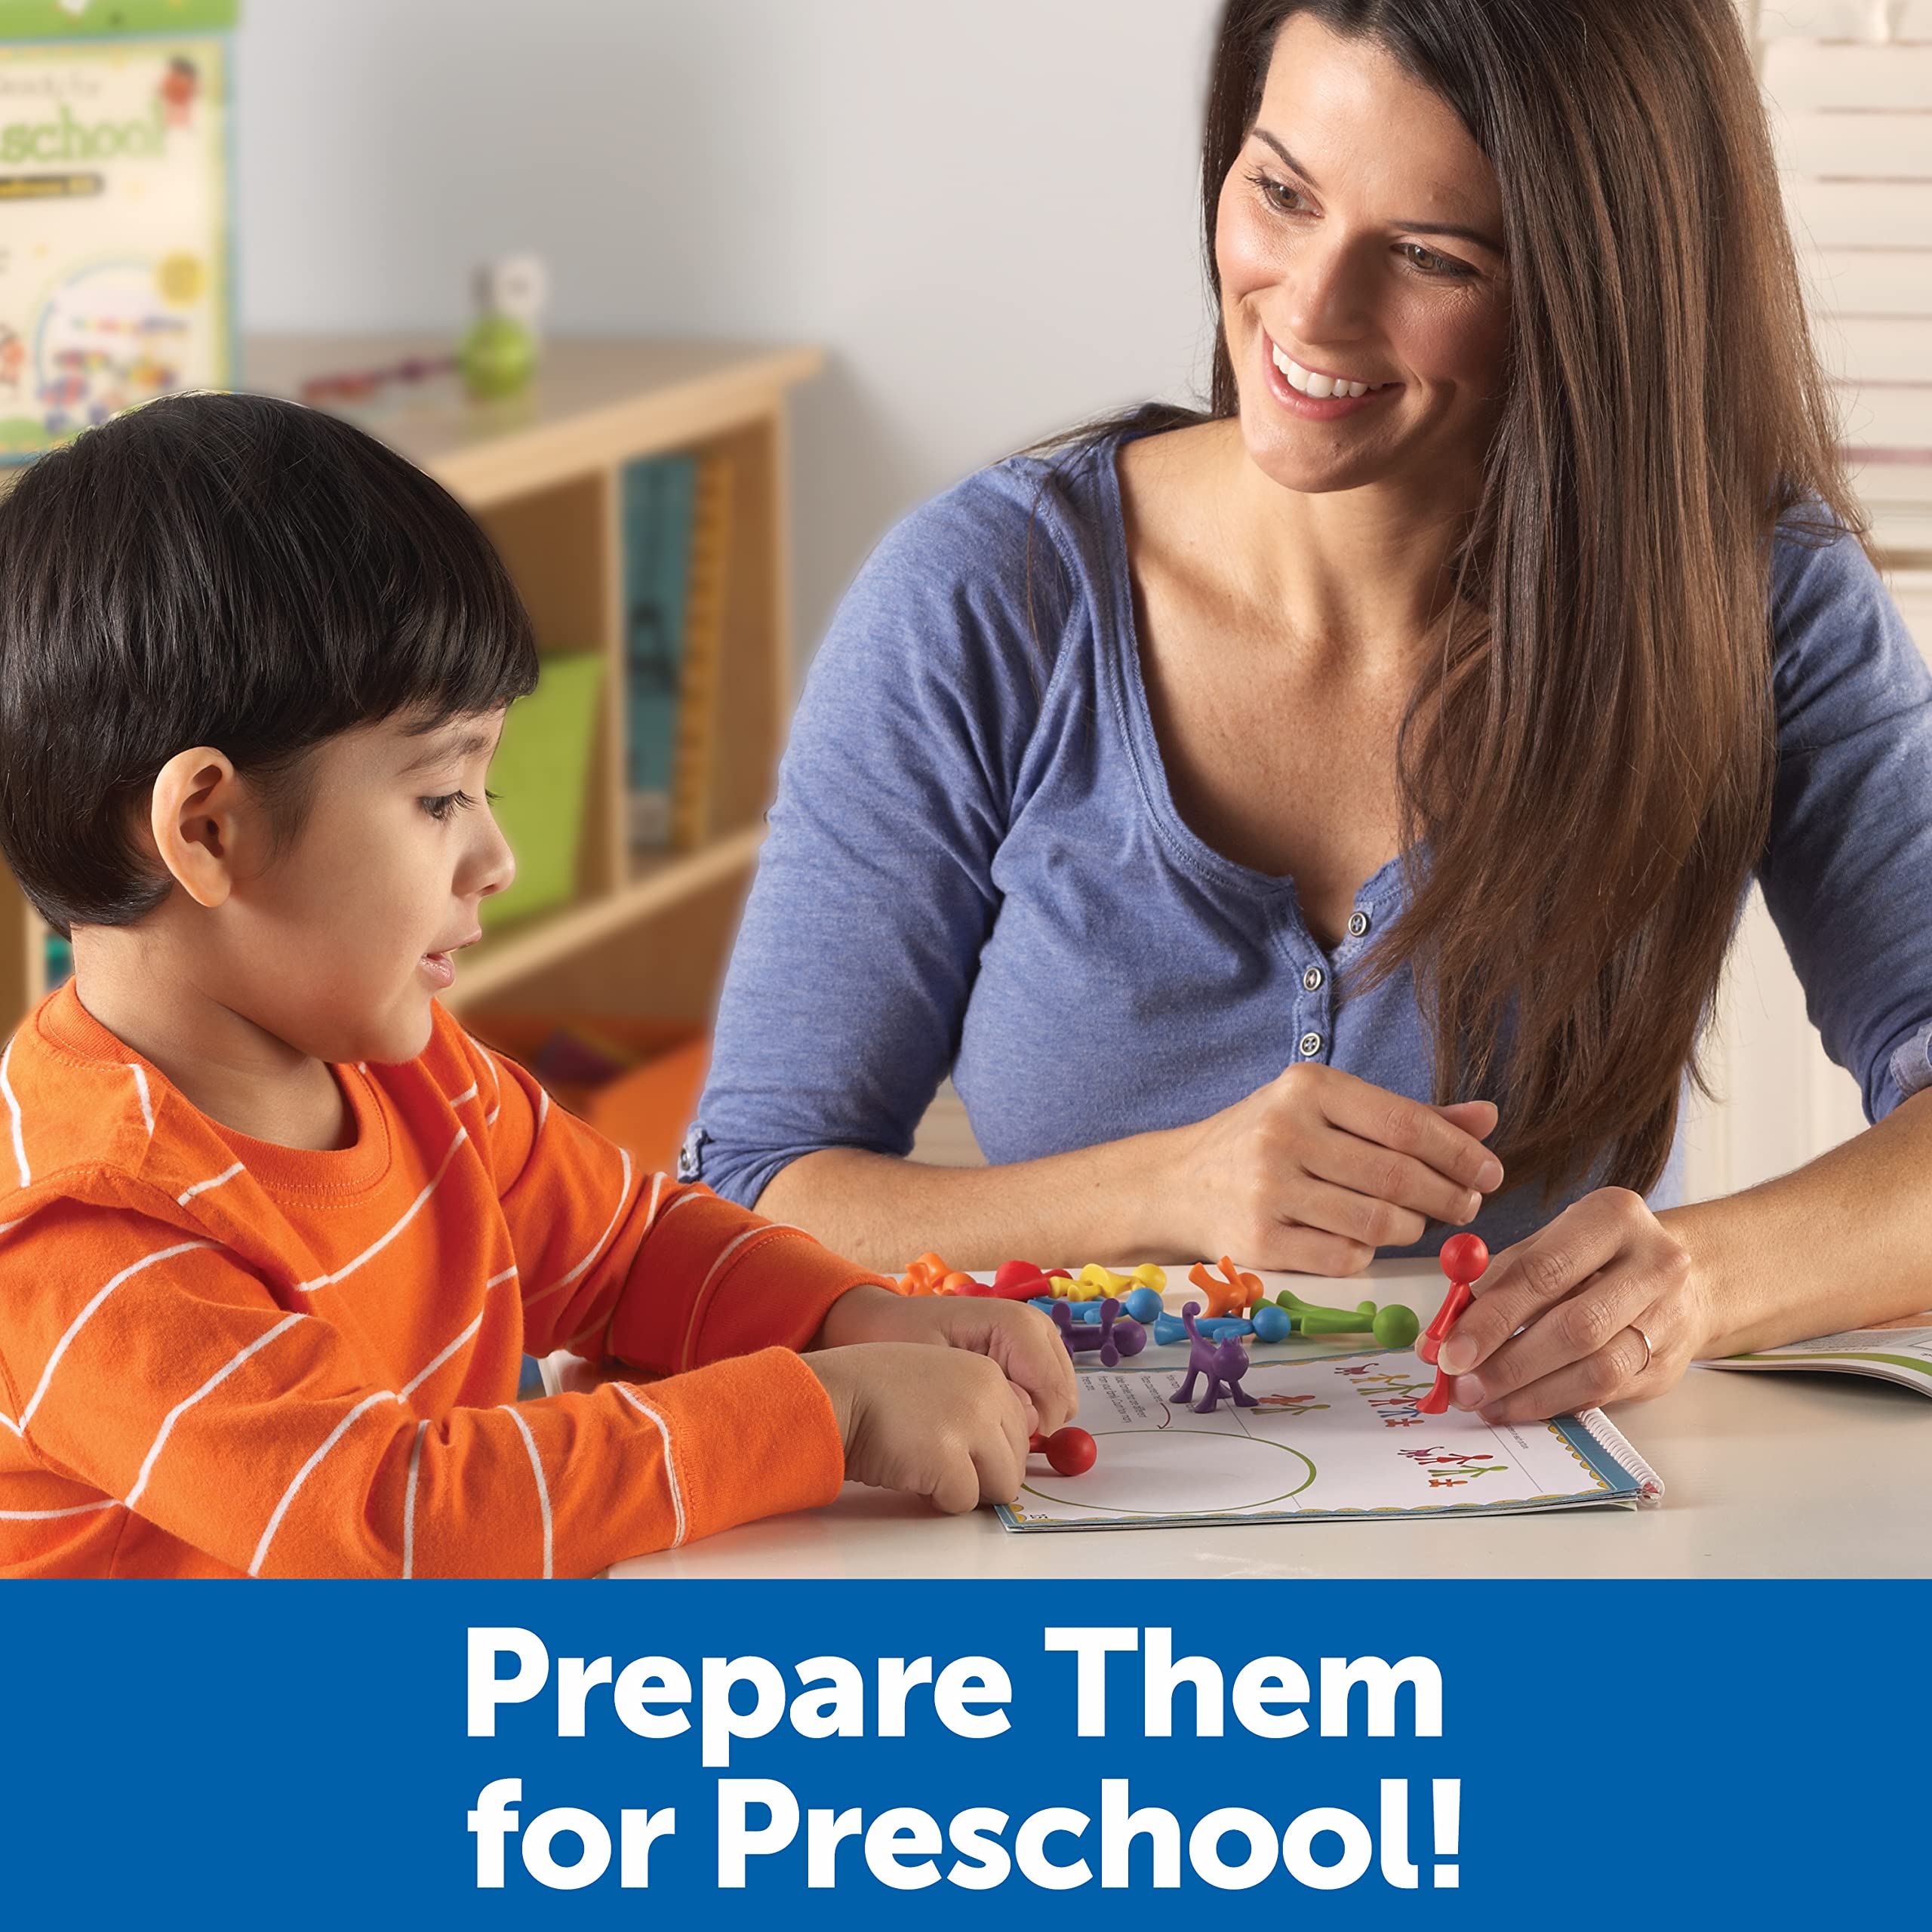 Learning Resources All Ready for Preschool Readiness Kit - 60 Activities Set, Ages 3+, Kindergartner Preparation Kit, Preschool Homeschool, Preschool Curriculum Kit